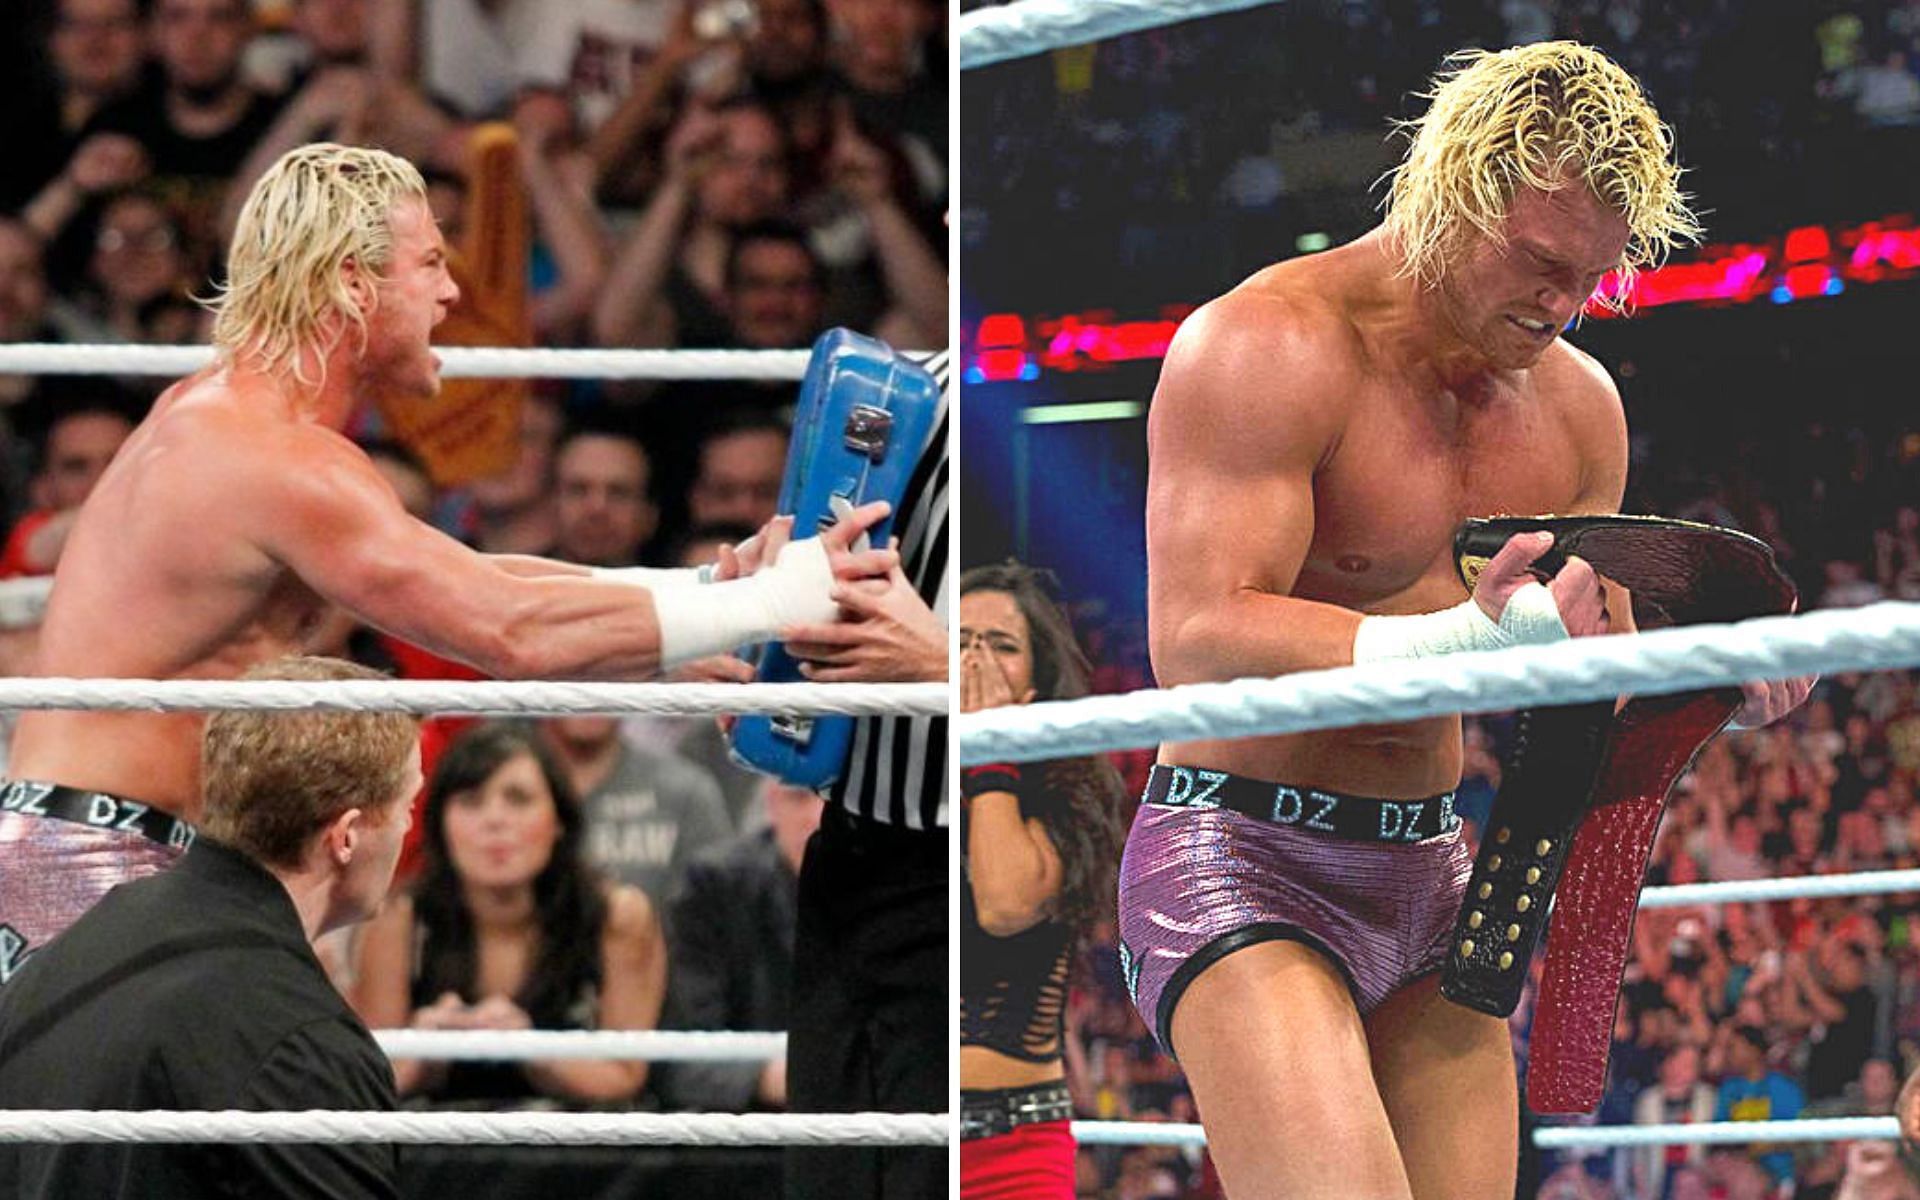 Dolph Ziggler is a multi-time world champion